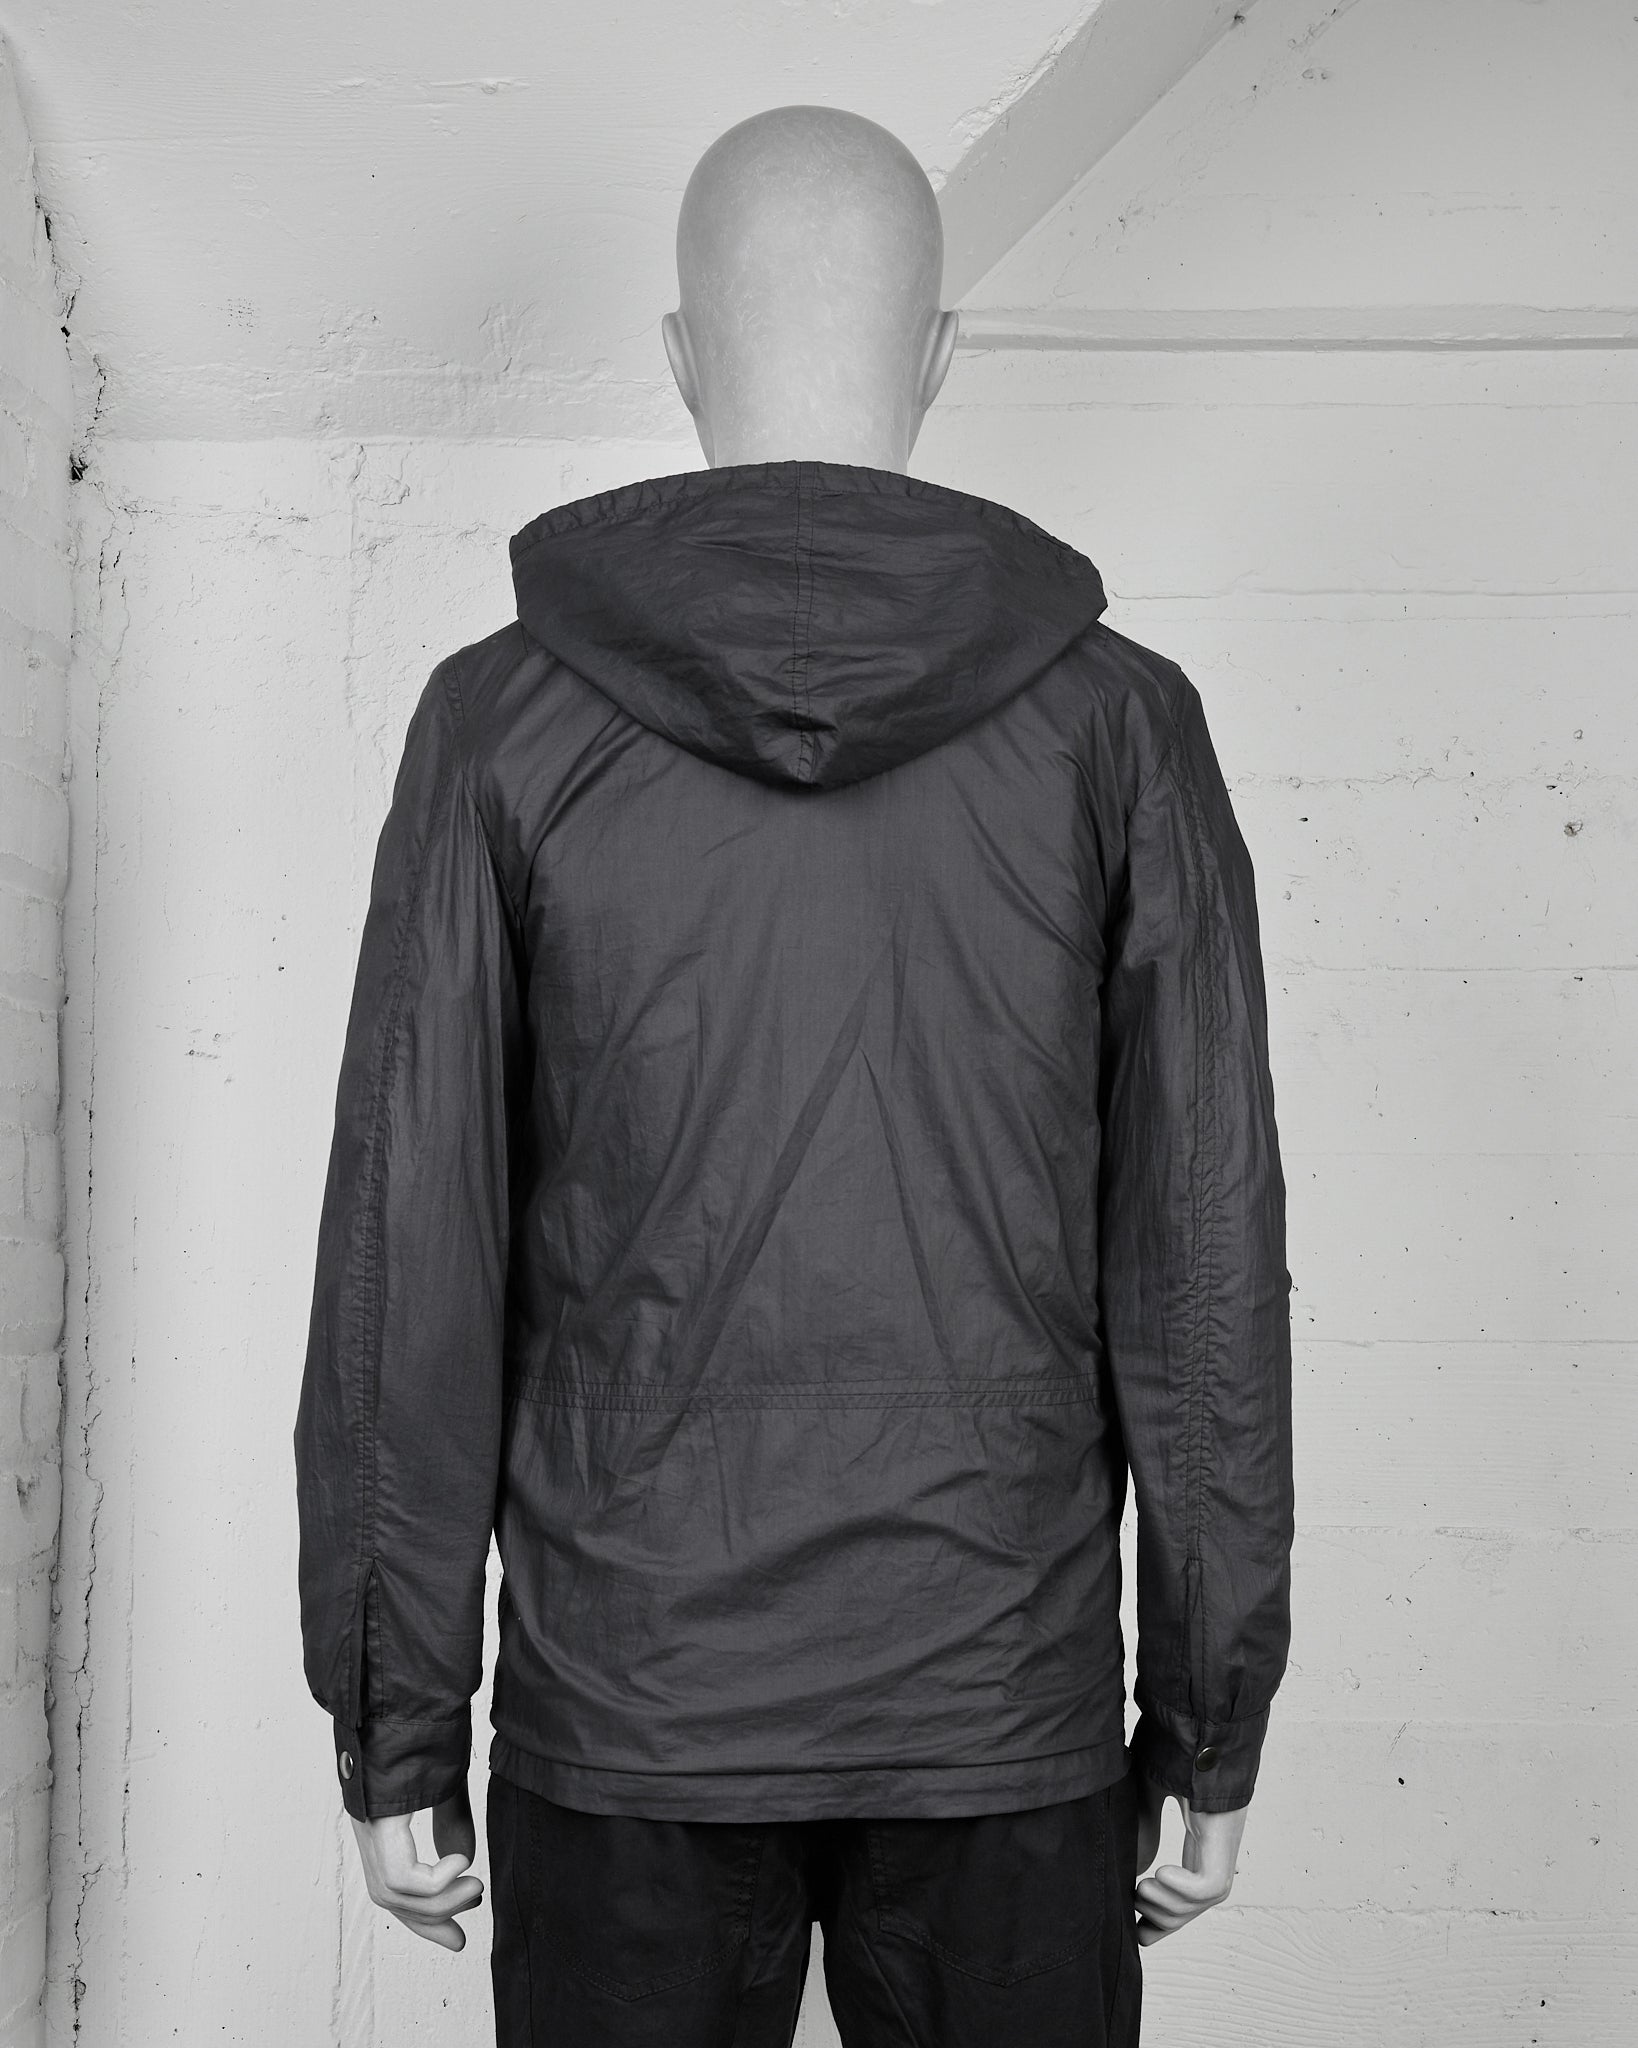 Hussein Chalayan Reversible Jacket - AW05 "In Shadows" back photo of interior jacket